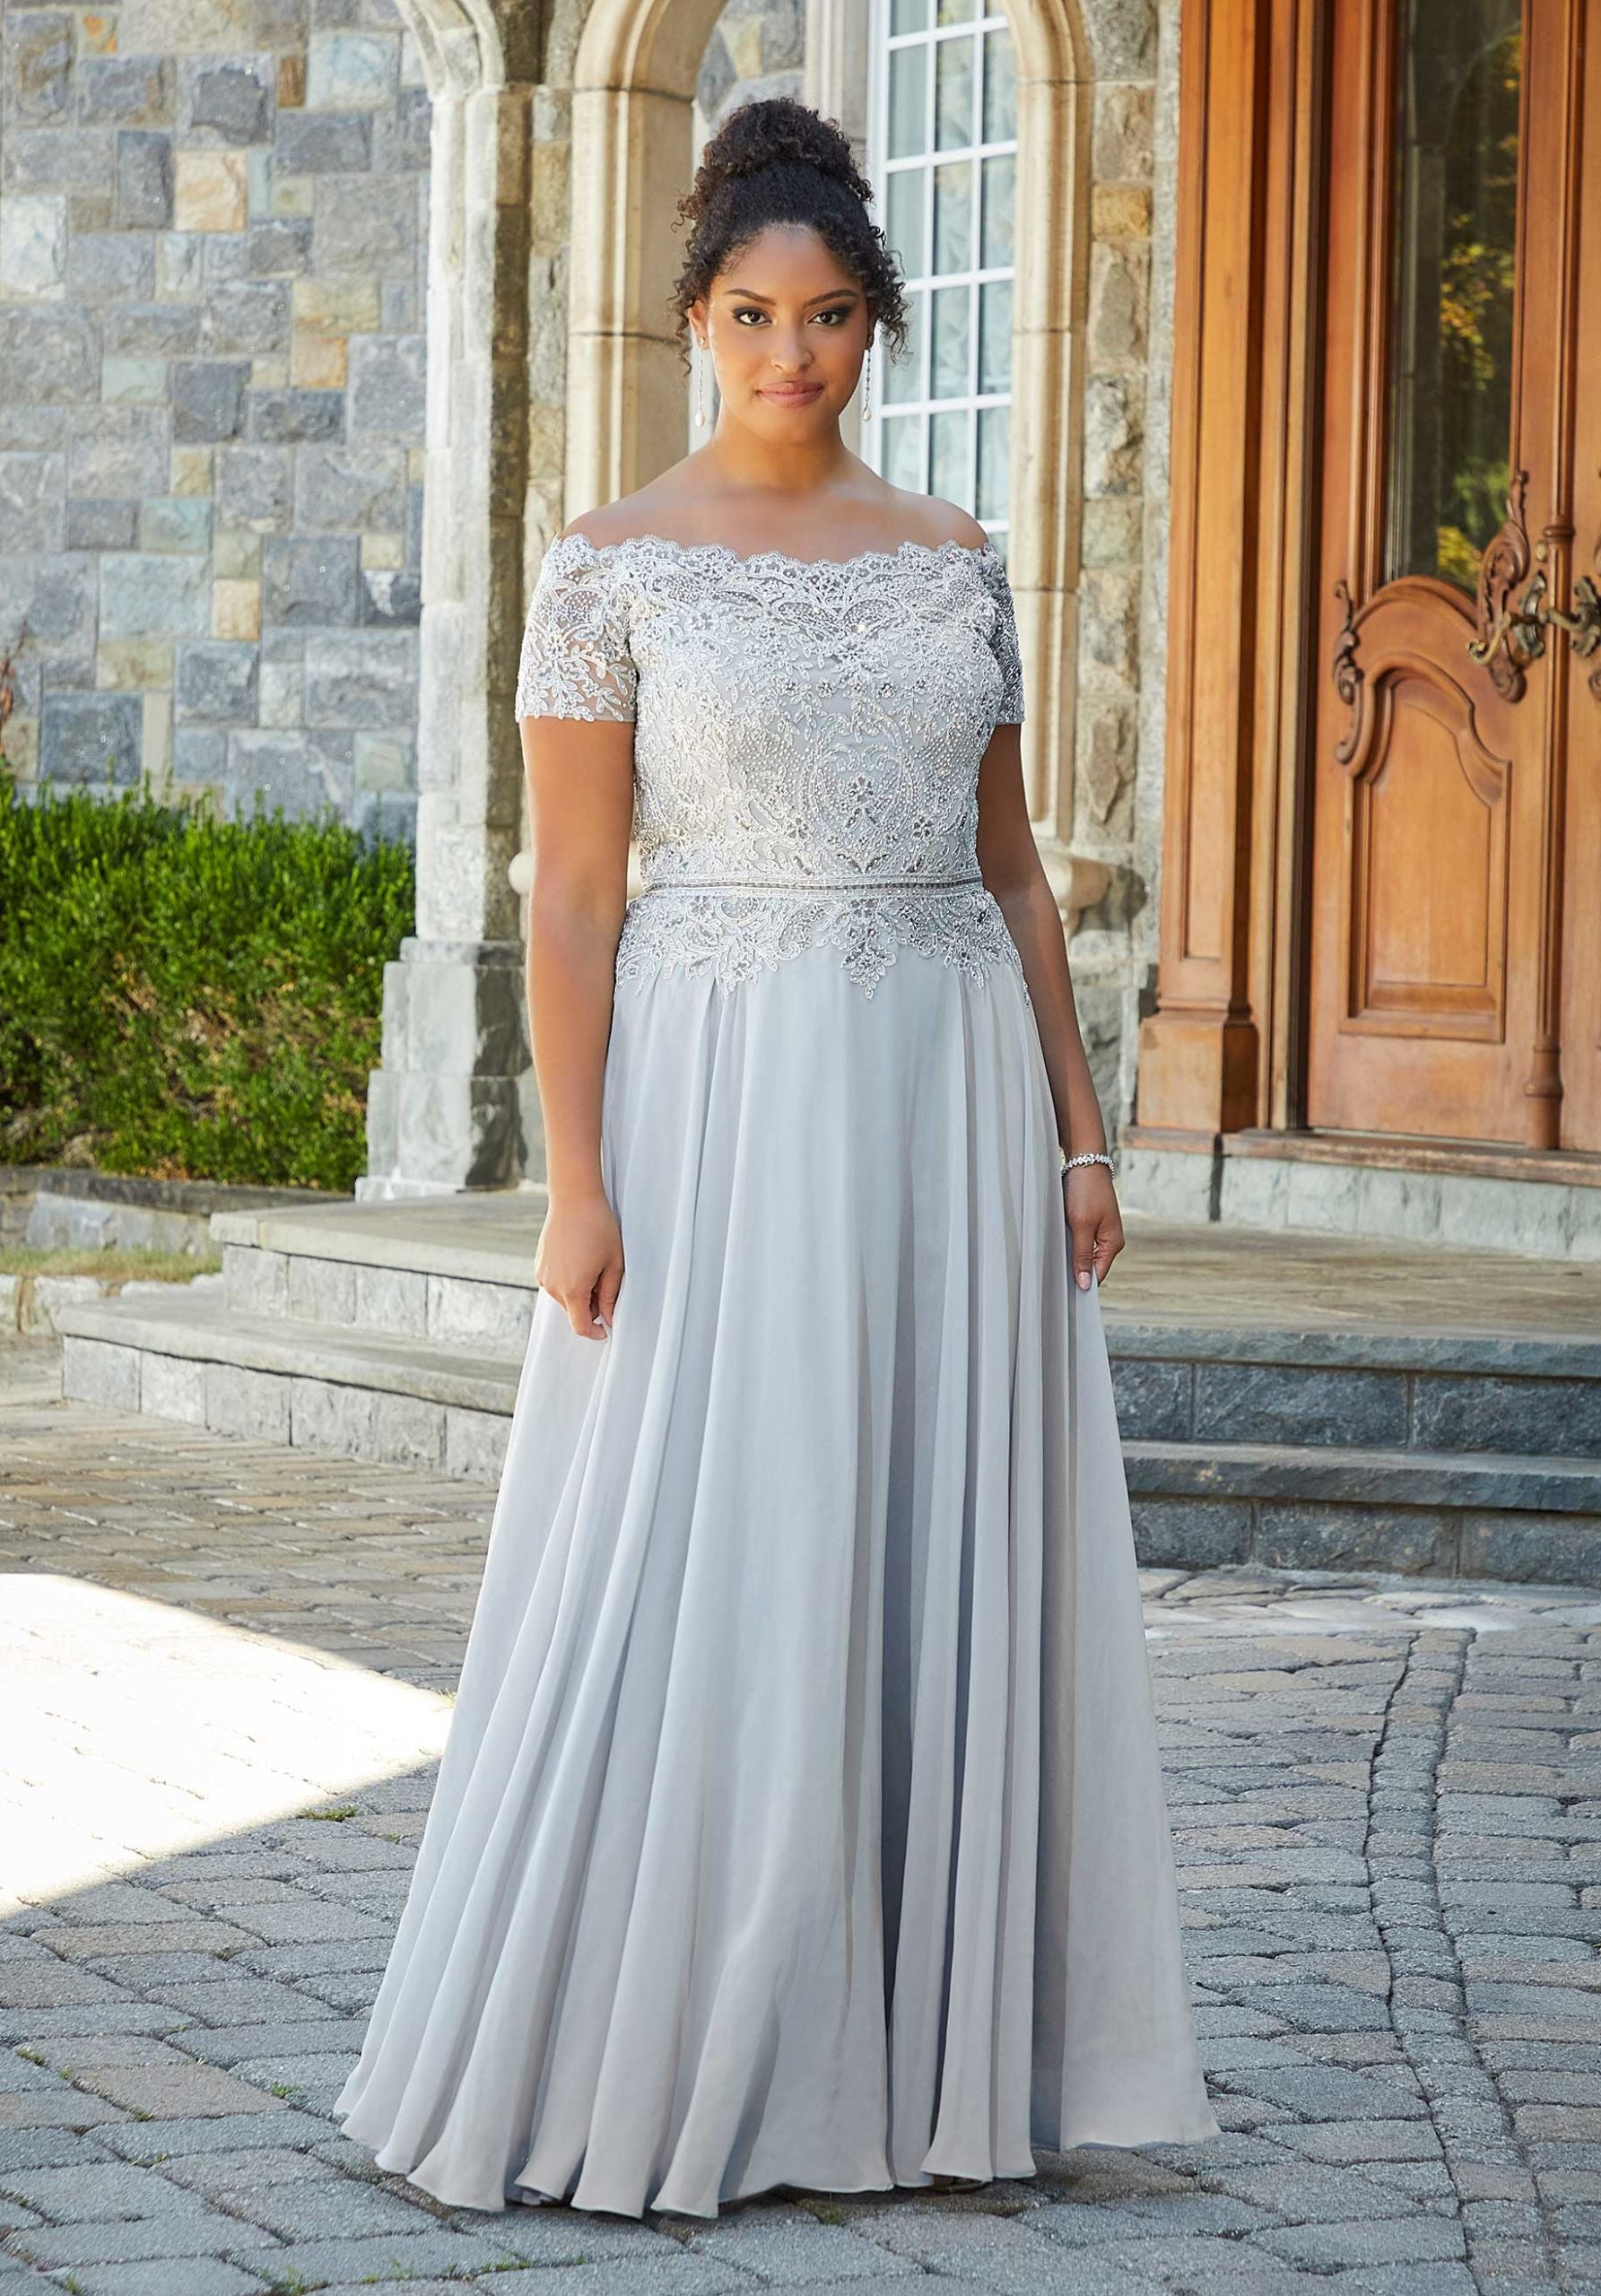 Beaded A-line Evening Gown In Chiffon With Appliqués Morilee